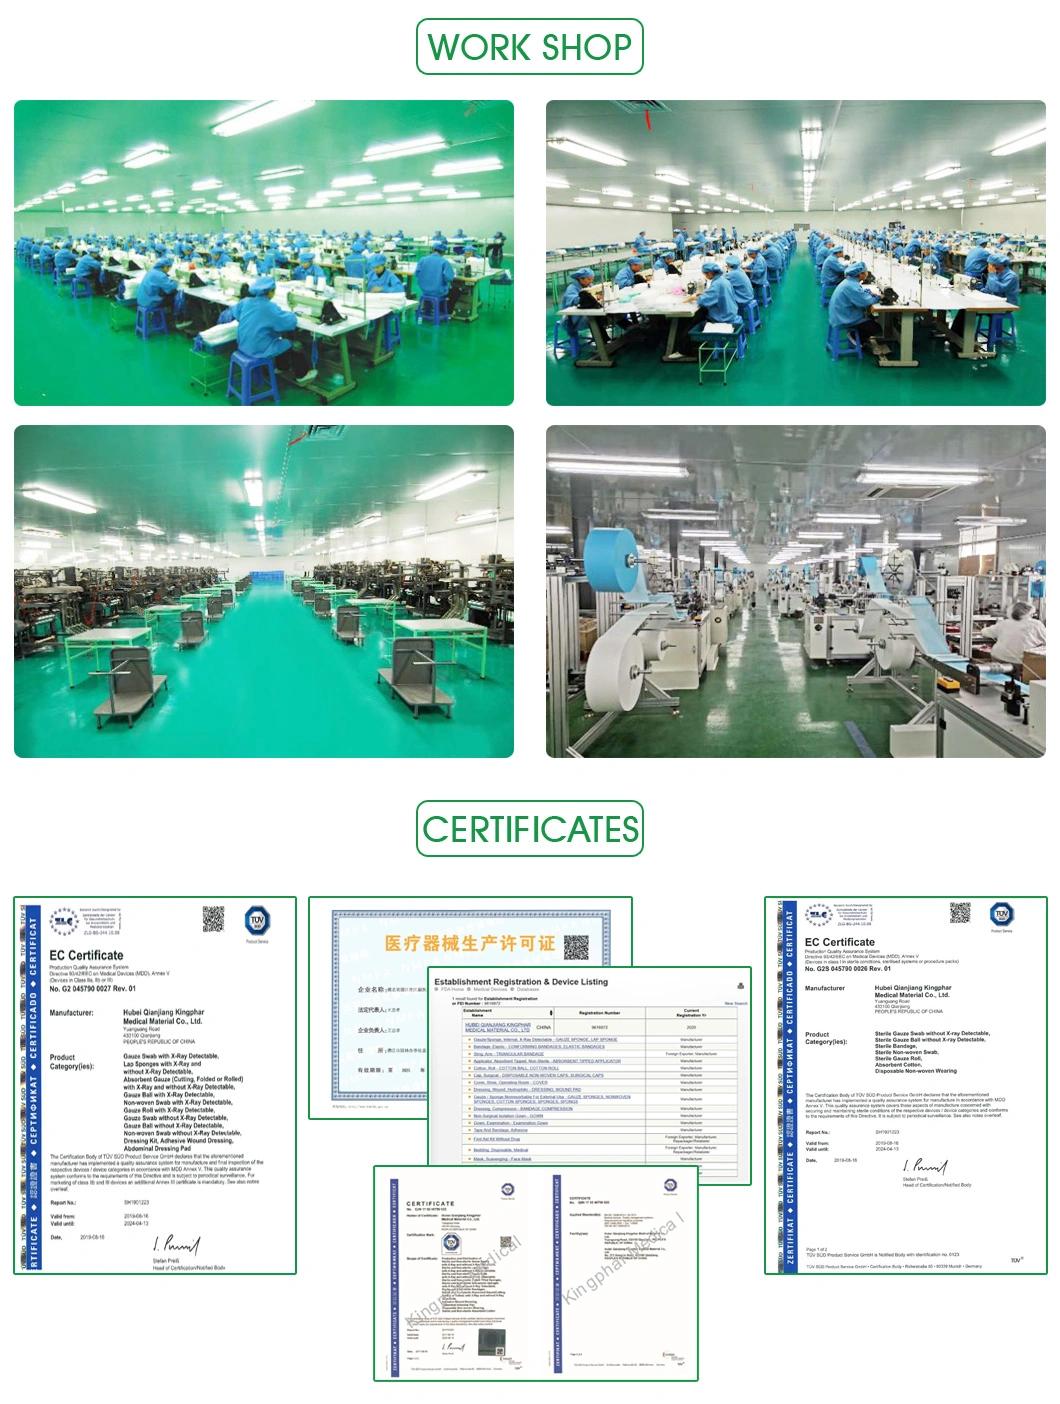 Wholesale Custom Medical Sterile Non-Woven Wound Dressing